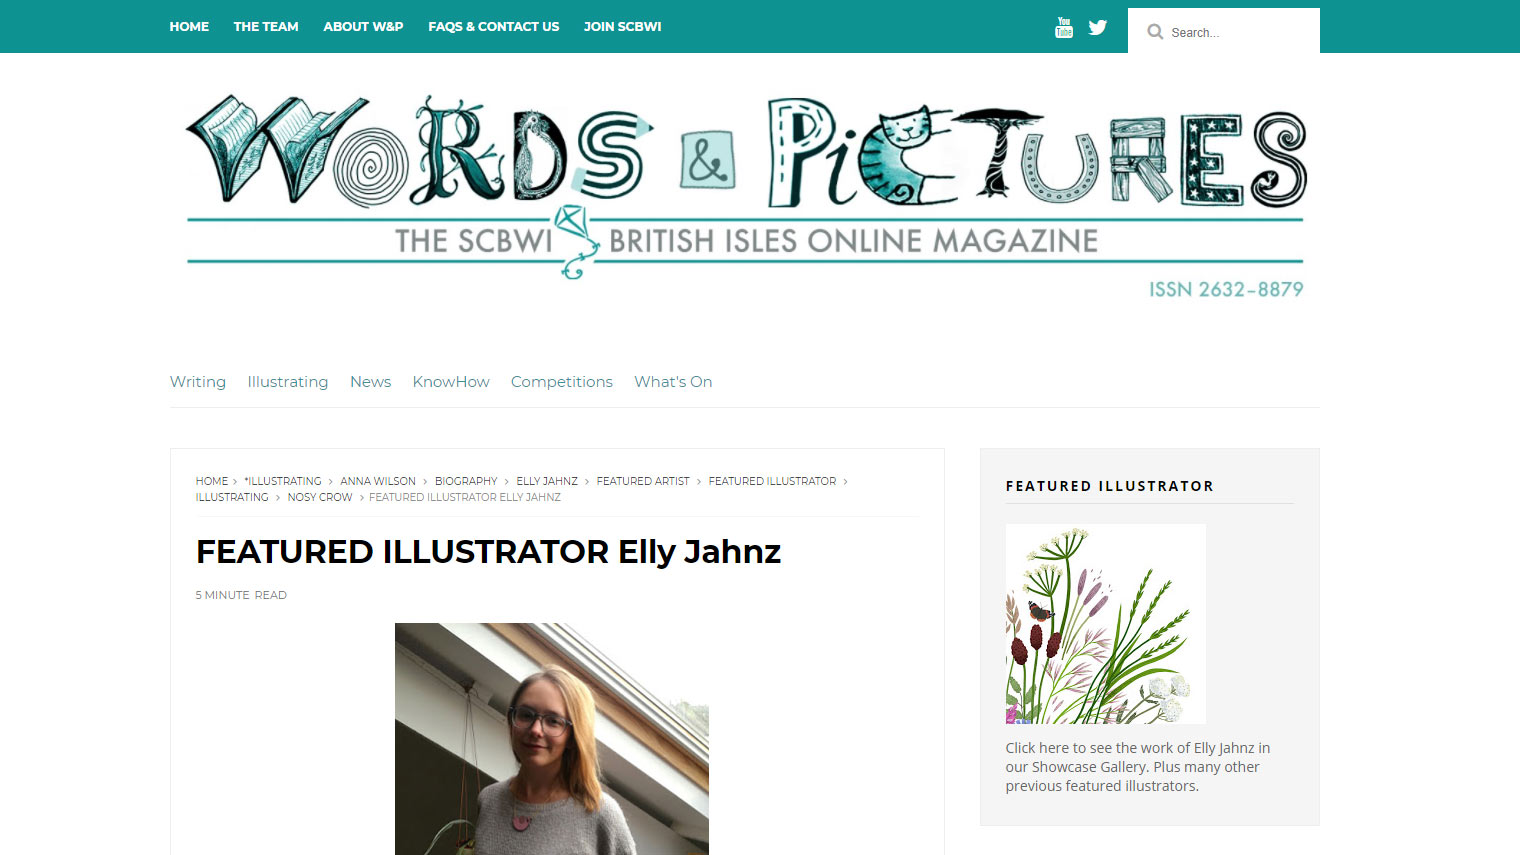 Screenshot of the featured illustrator page in Words and Pictures magazine